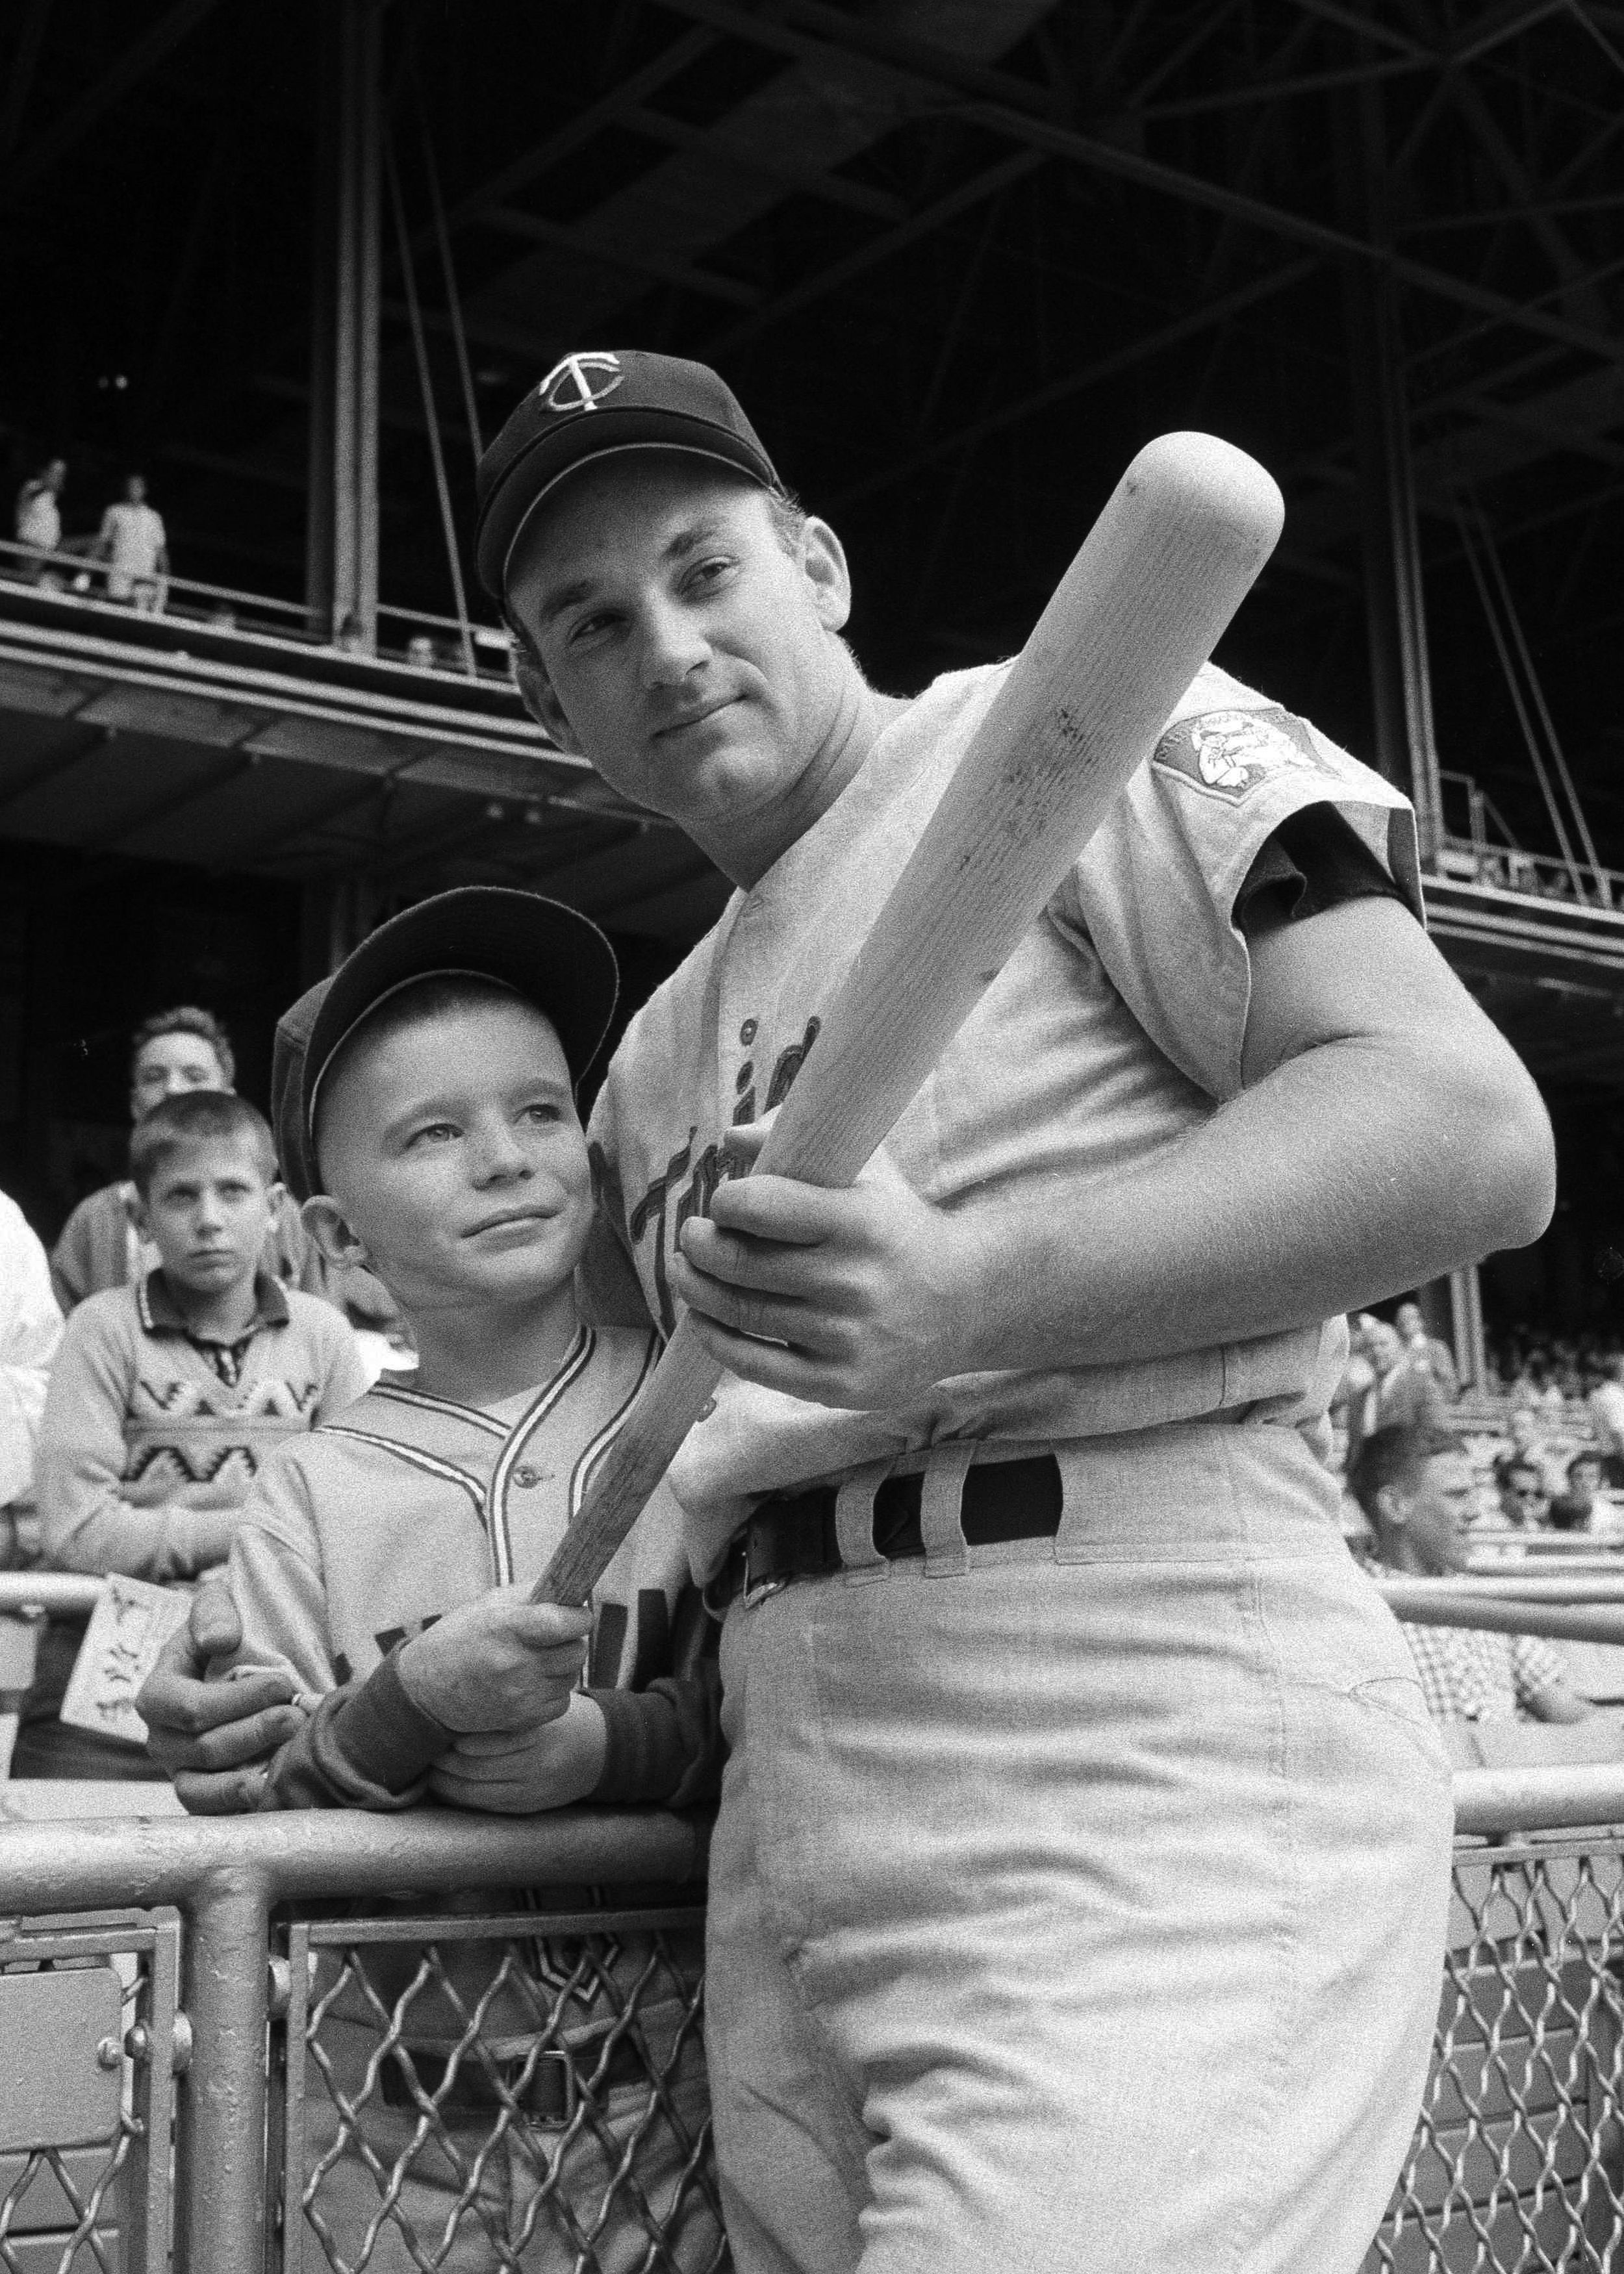 MLB Hall of Famer Harmon Killebrew has esophageal cancer; prepares for  'most difficult battle' – New York Daily News